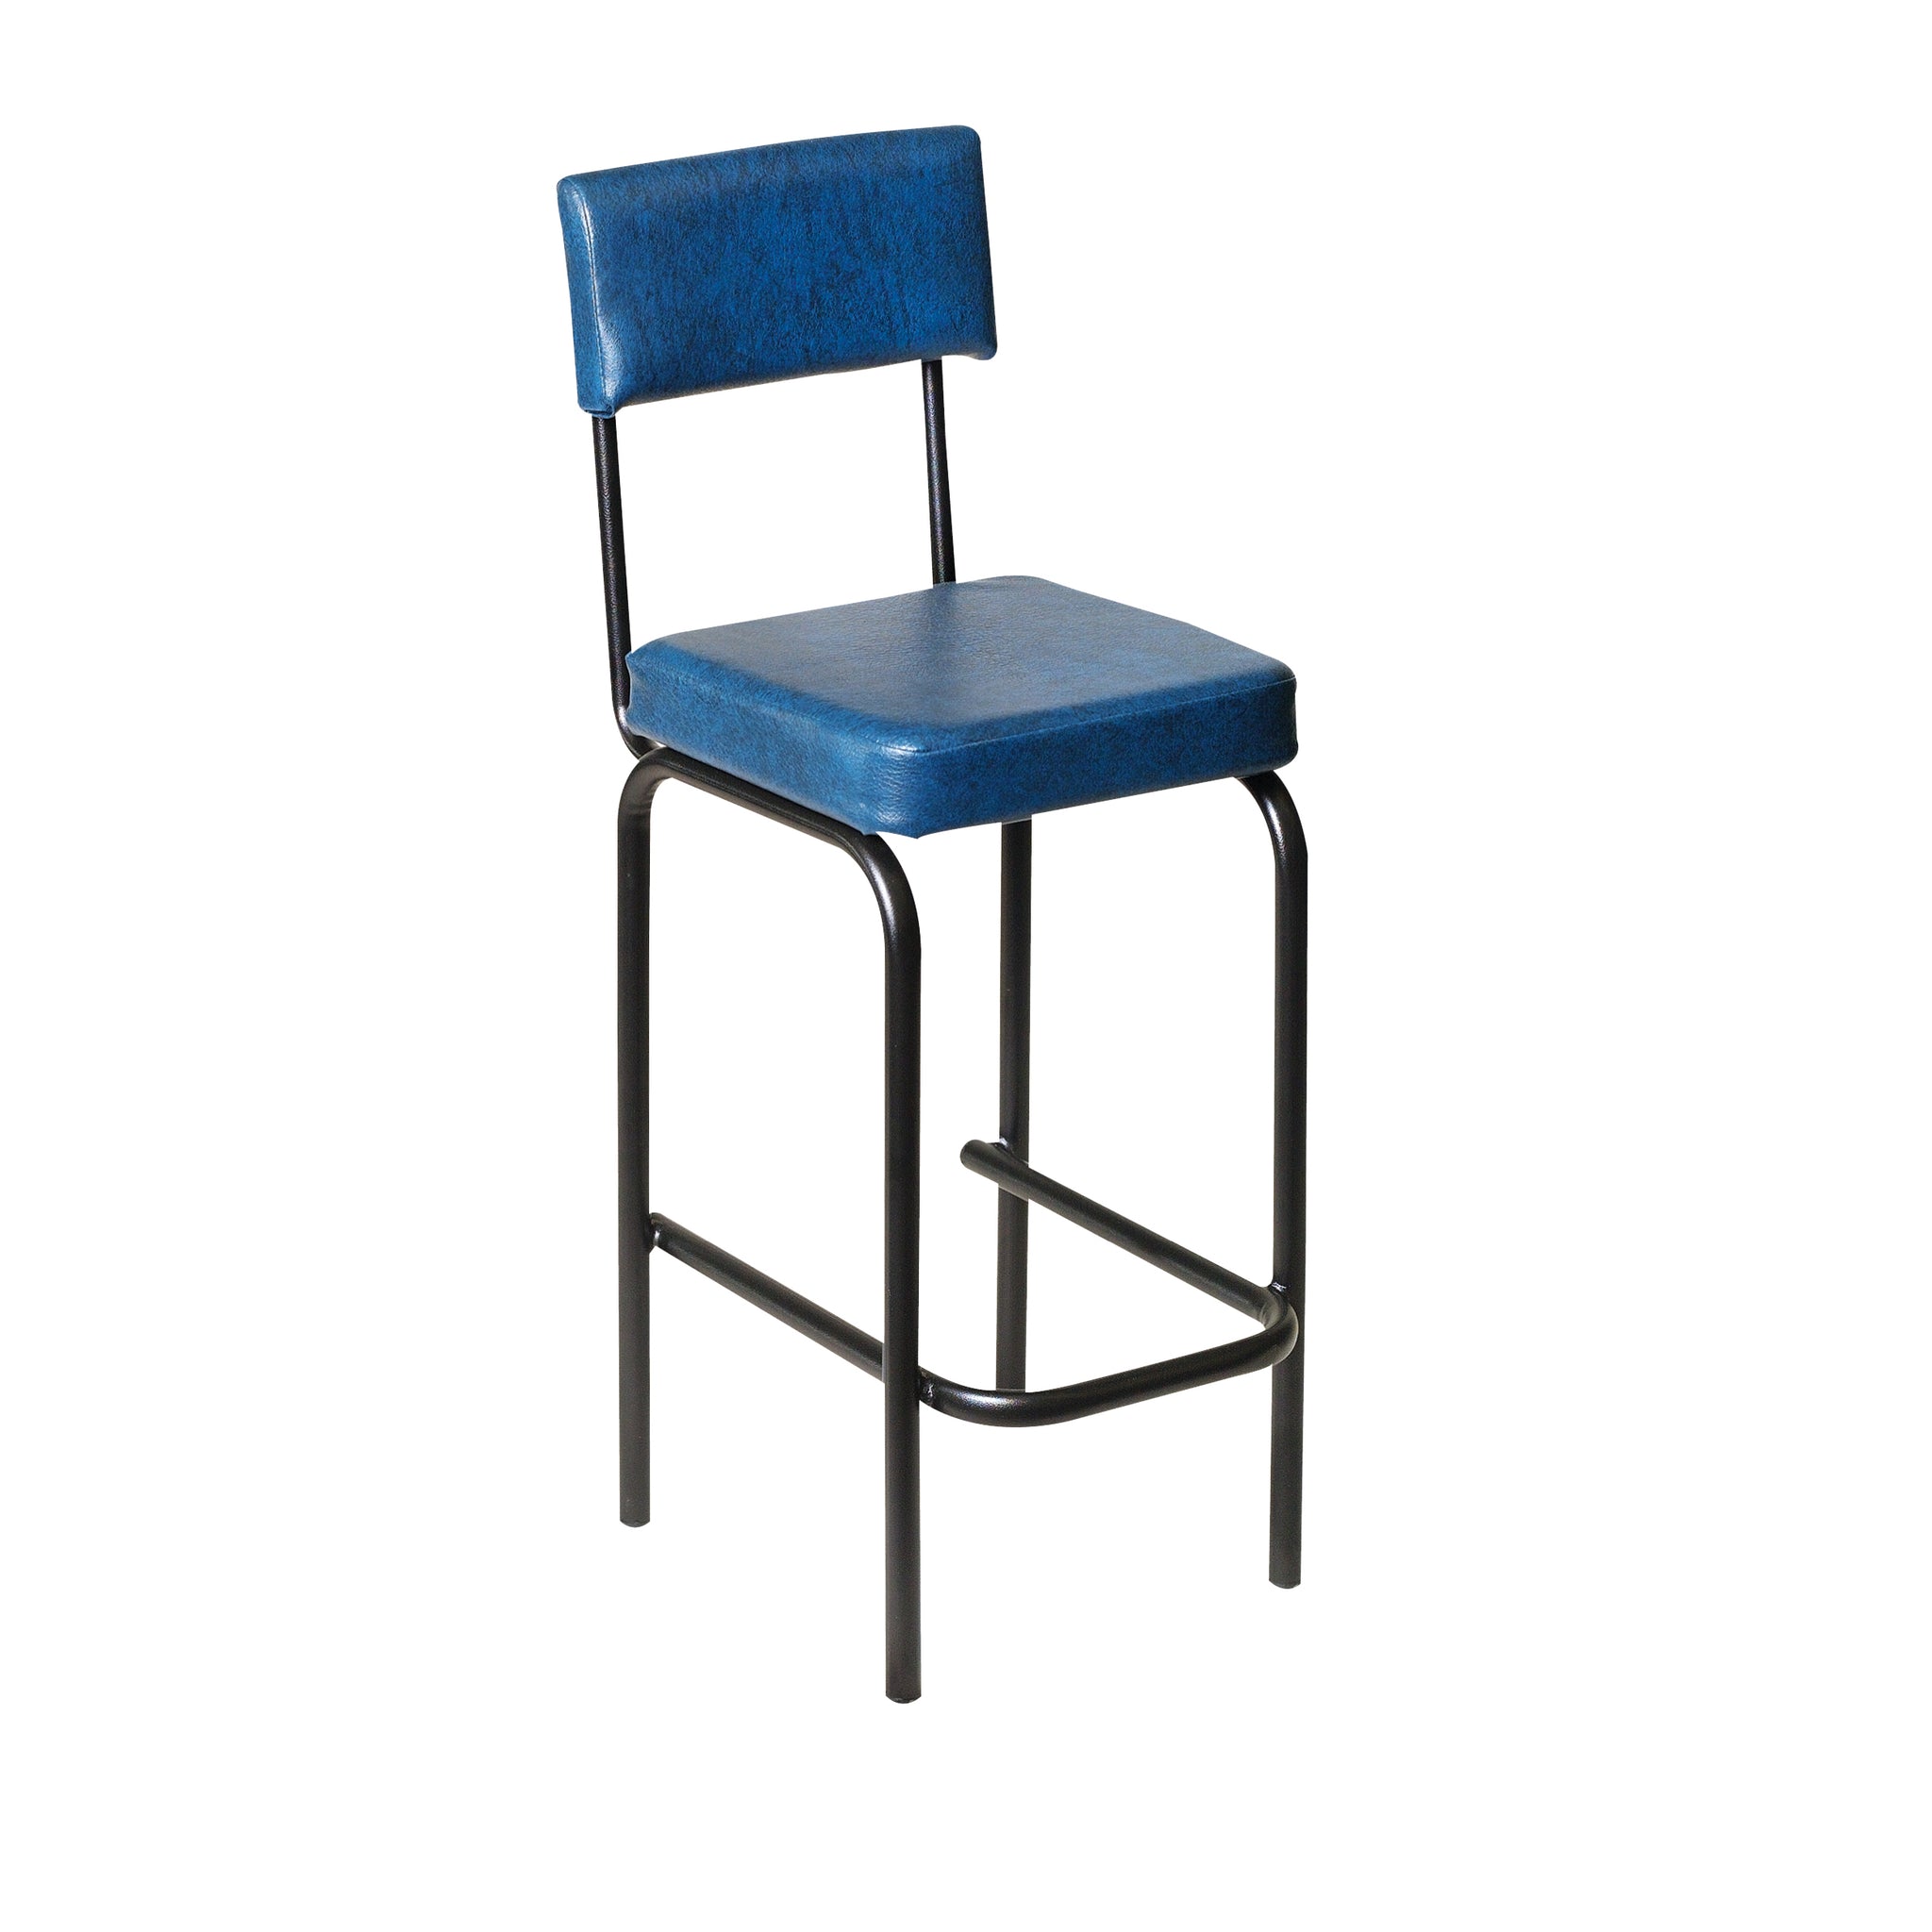 Hedcor Utility Chair